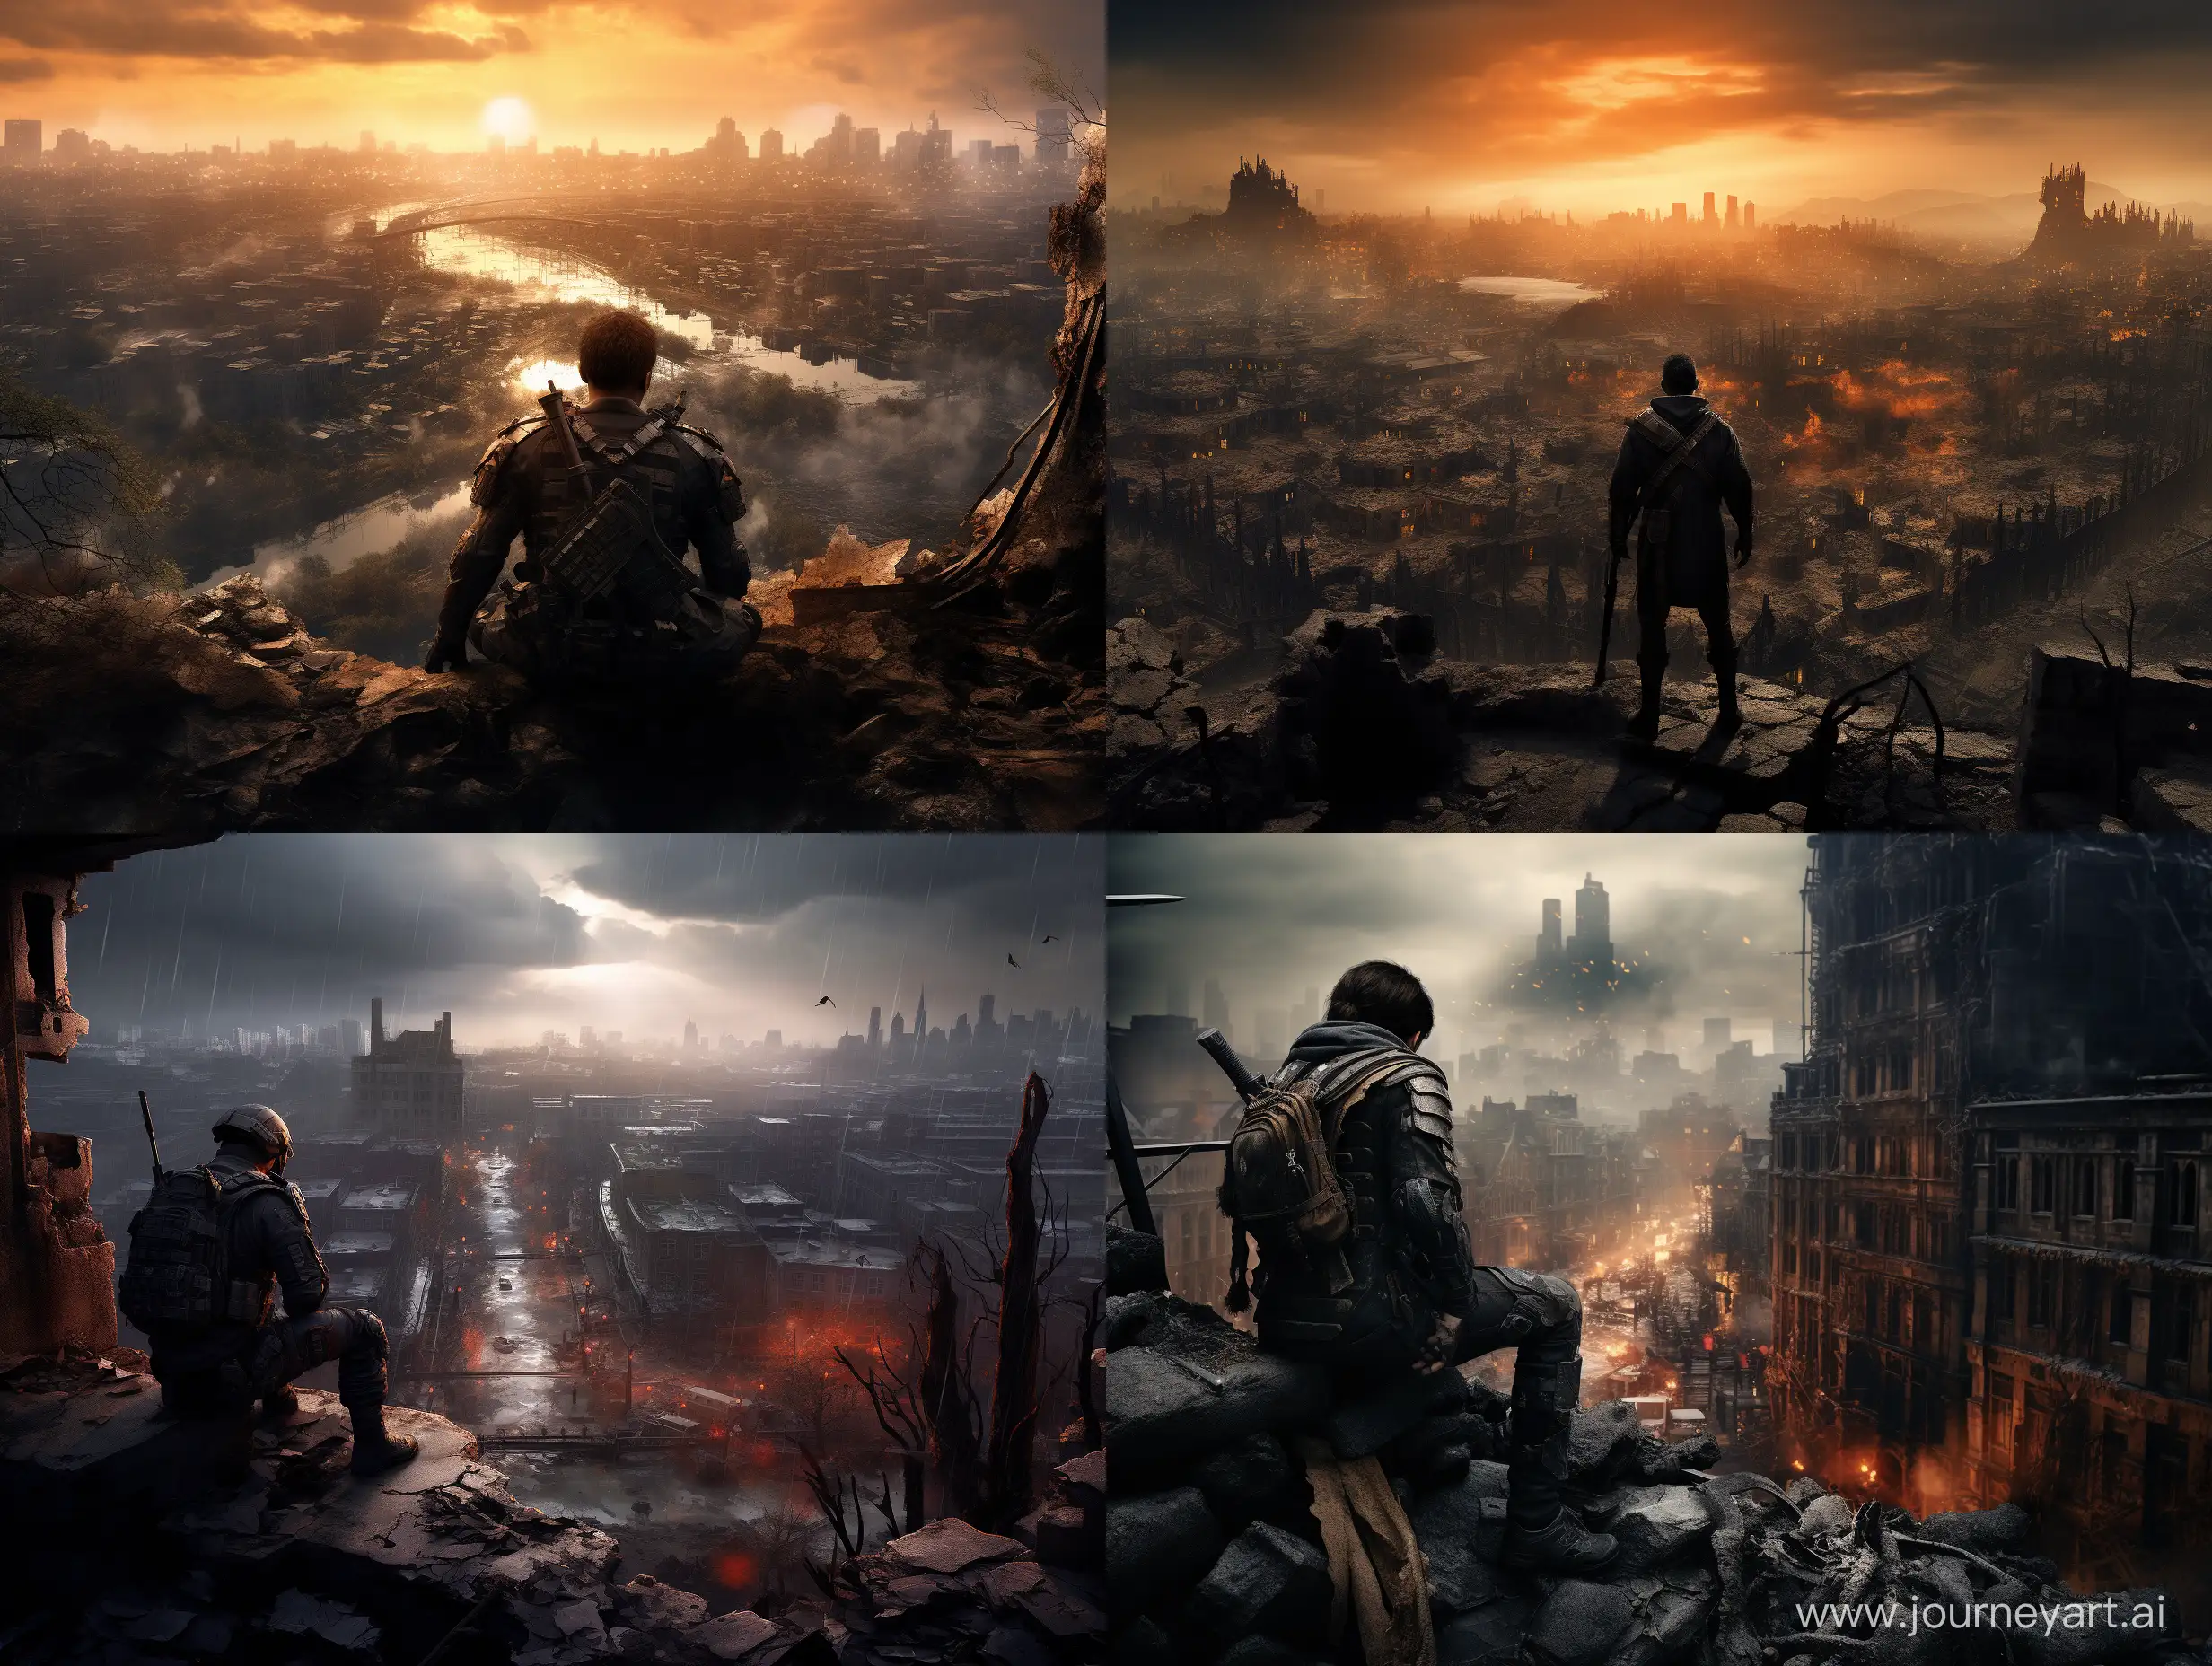 WarTorn-City-Reflections-of-a-Soldier-in-Desolation